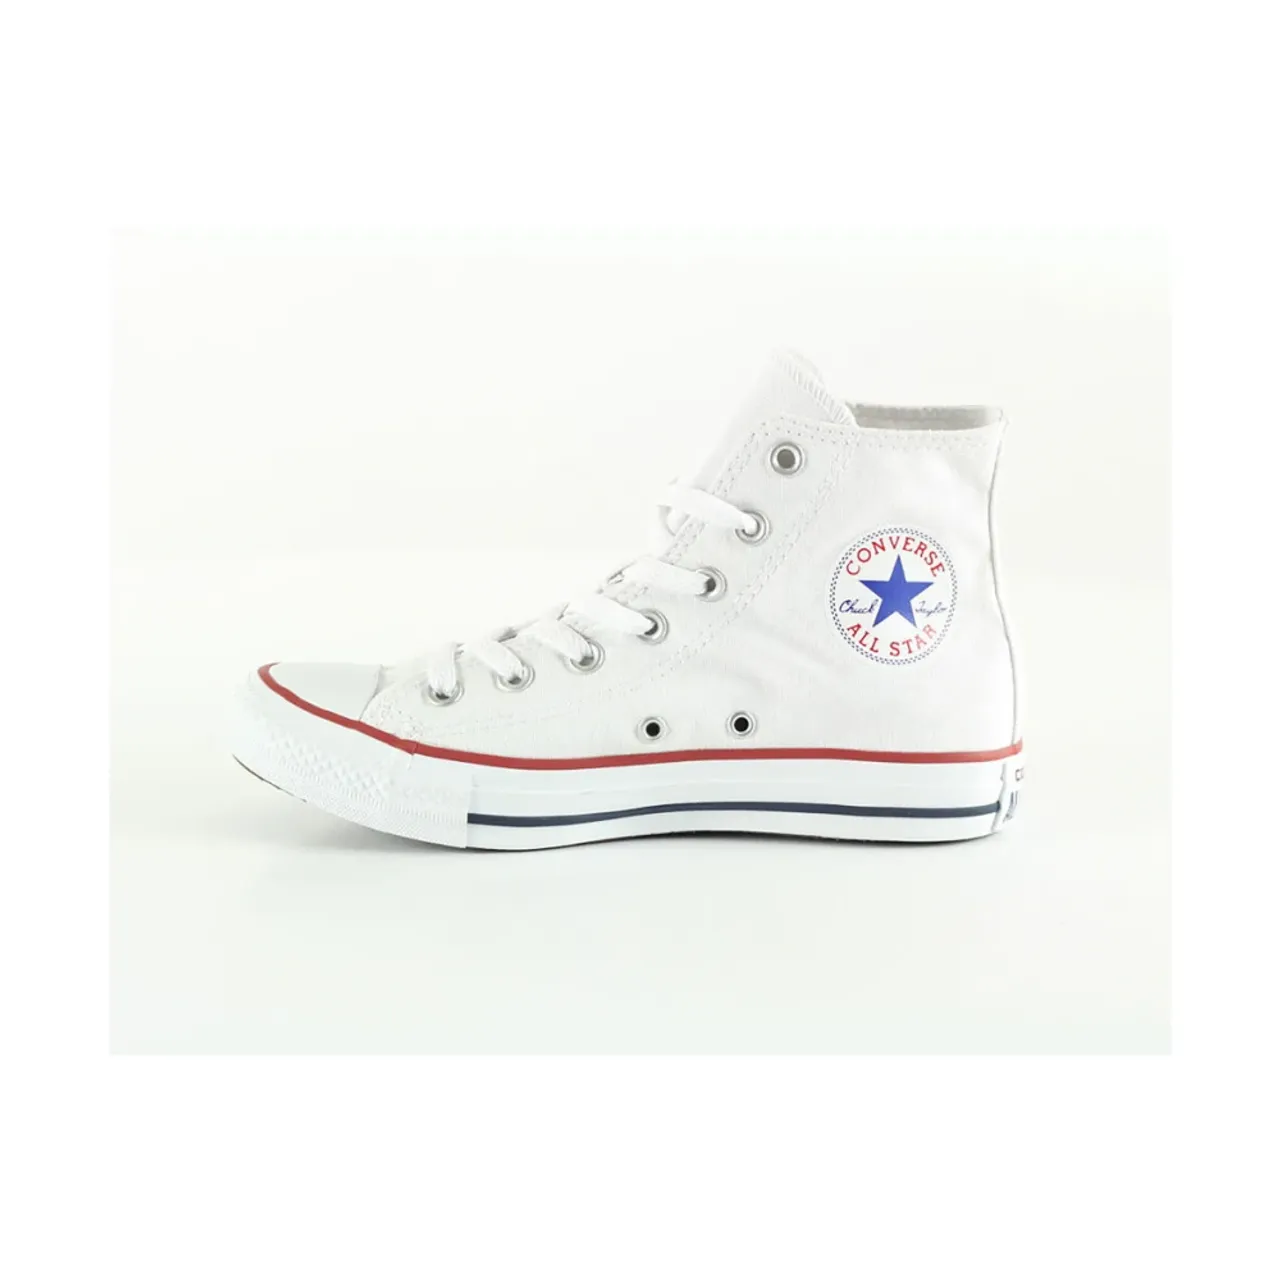 Converse , High Top Canvas Sneakers ,White male, Sizes: 5 UK, 4 1/2 UK, 6 UK, 7 1/2 UK, 3 UK, 2 1/2 UK, 4 UK, 6 1/2 UK, 8 1/2 UK, 3 1/2 UK, 9 UK, 5 1/